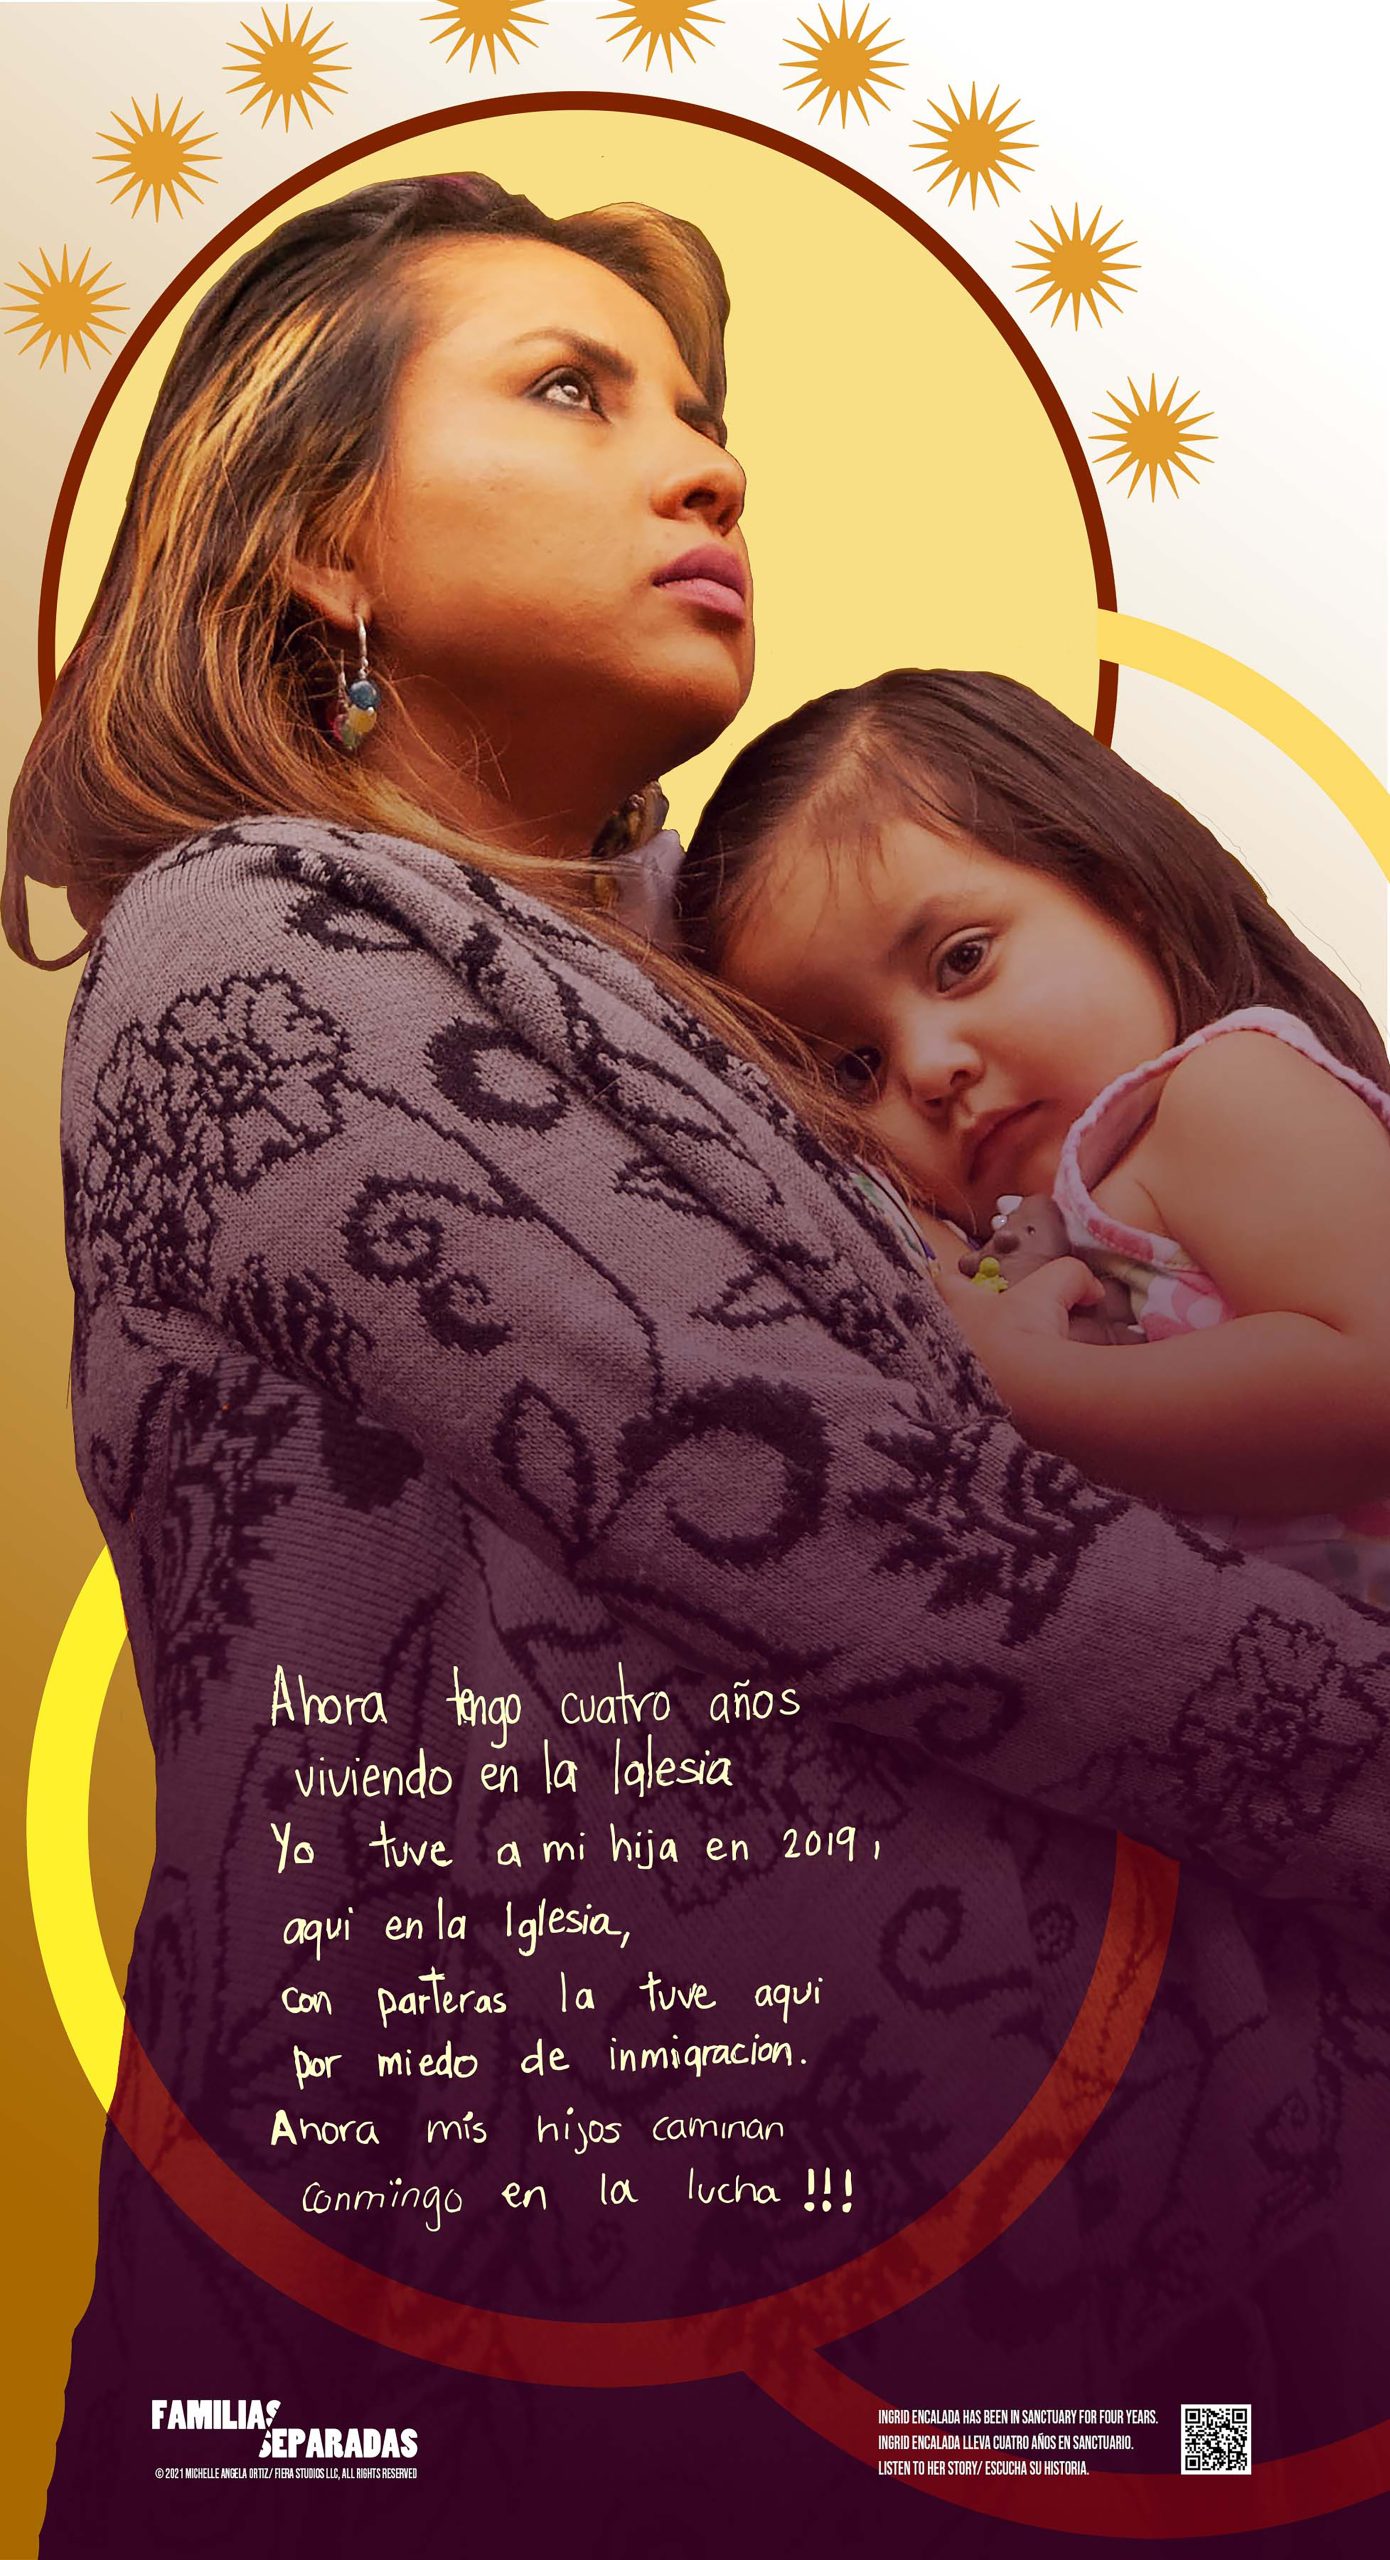 Poster: A poster of a portrait of Ingrid Encalada standing with her daughter in her arms against a background with a yellow sun design, wearing a purple patterned top and looking upward. The logo for Familias Separadas appears in a lower corner. Video: Opening with the words Familias Separadas, in text that separates in two directions, a video shows Ingrid Encalada, a Latina woman with brown hair, wearing a blue floral top and sweater and hoop earrings, seated on an olive couch with a quilted wallhanging above it, speaking about her experience of arrest, detention and threats of deportation. With subtitles translating Spanish to English.